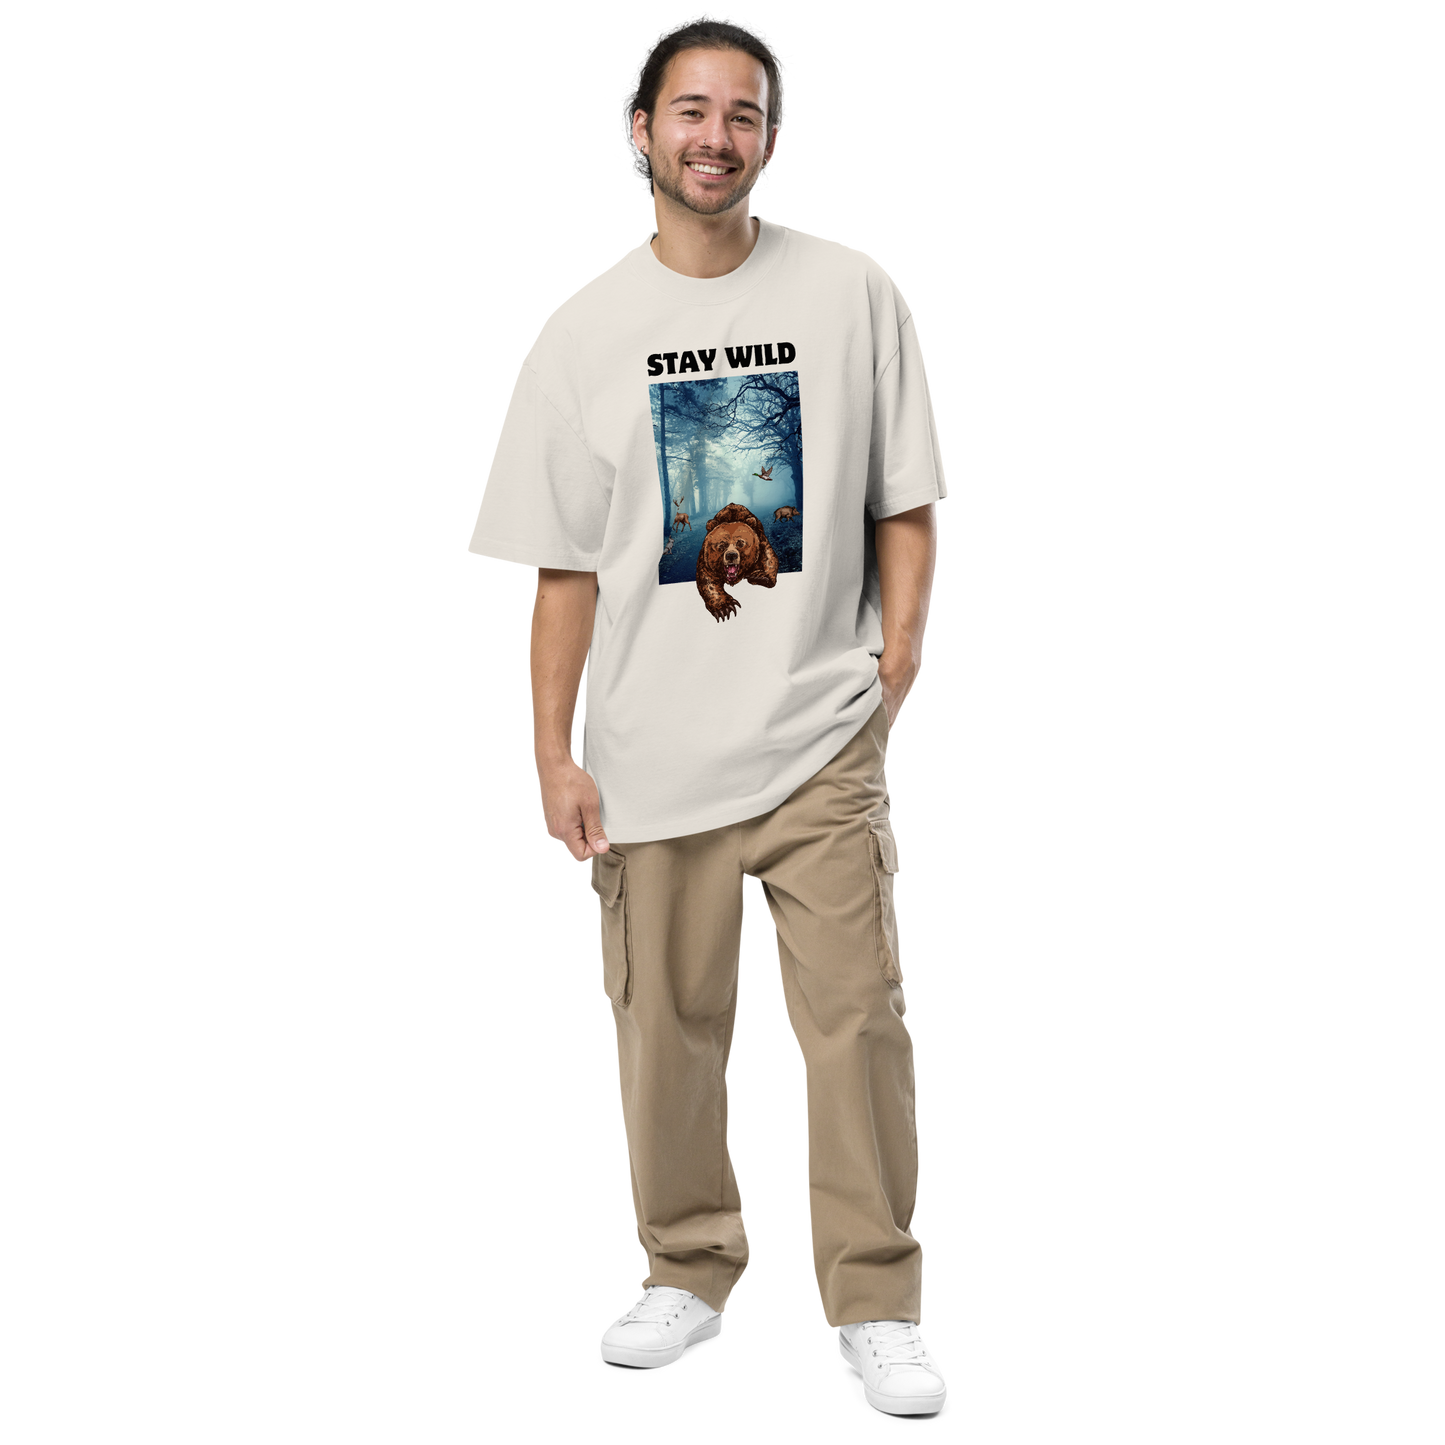 Man wearing a Faded Bone Bear Oversized T-Shirt featuring a Stay Wild graphic on the chest - Cool Graphic Bear Oversized Tees - Boozy Fox